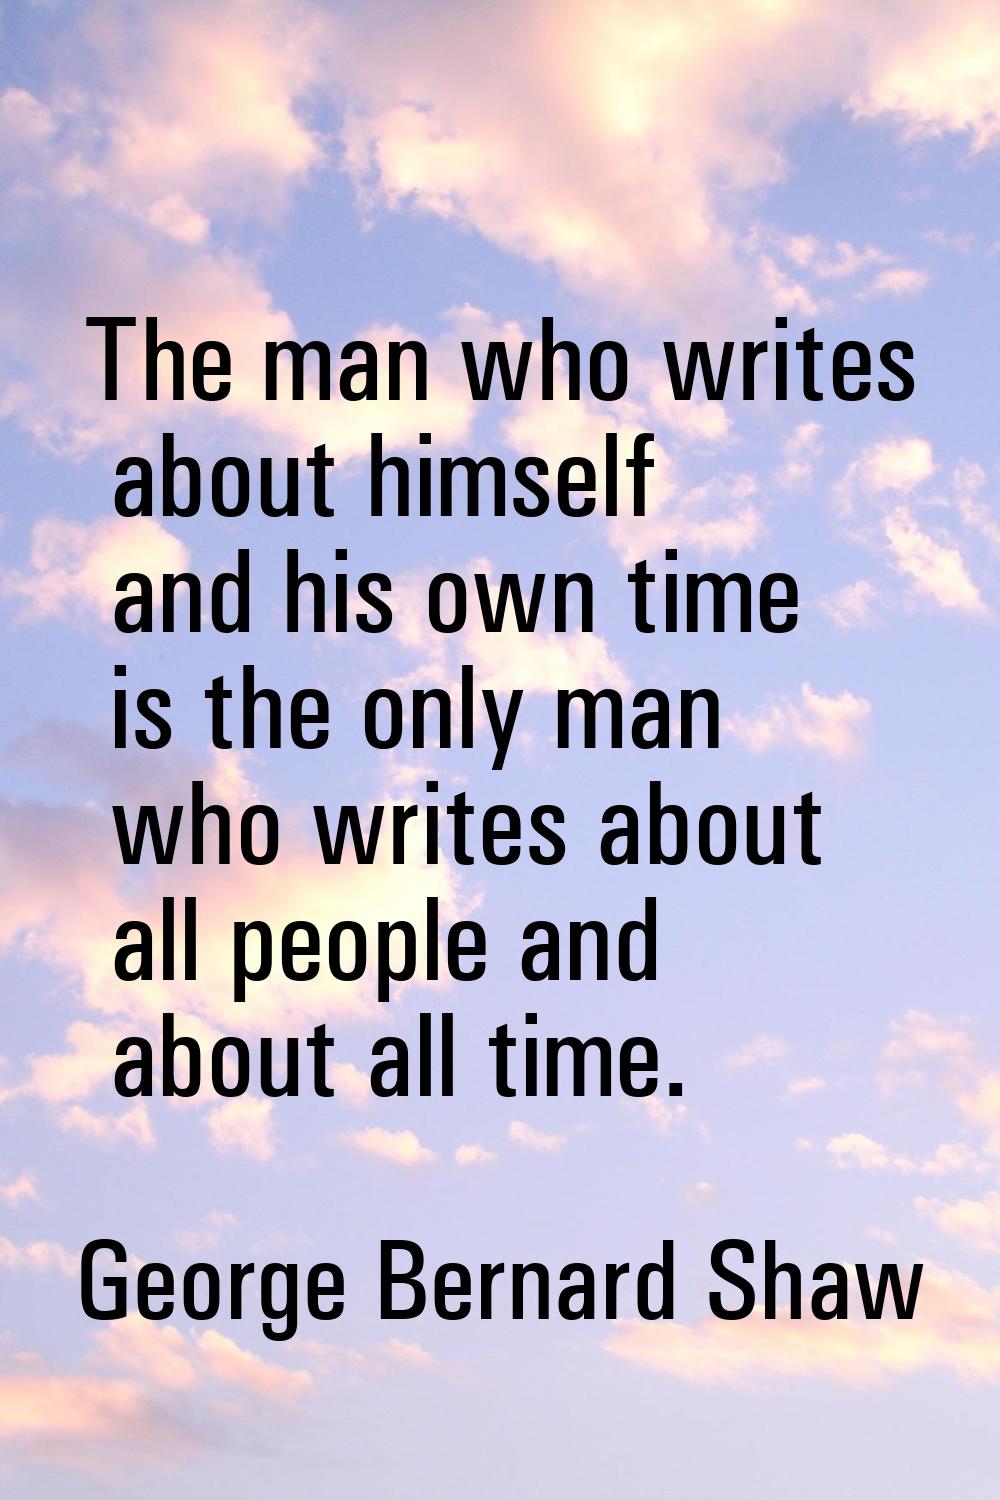 The man who writes about himself and his own time is the only man who writes about all people and a